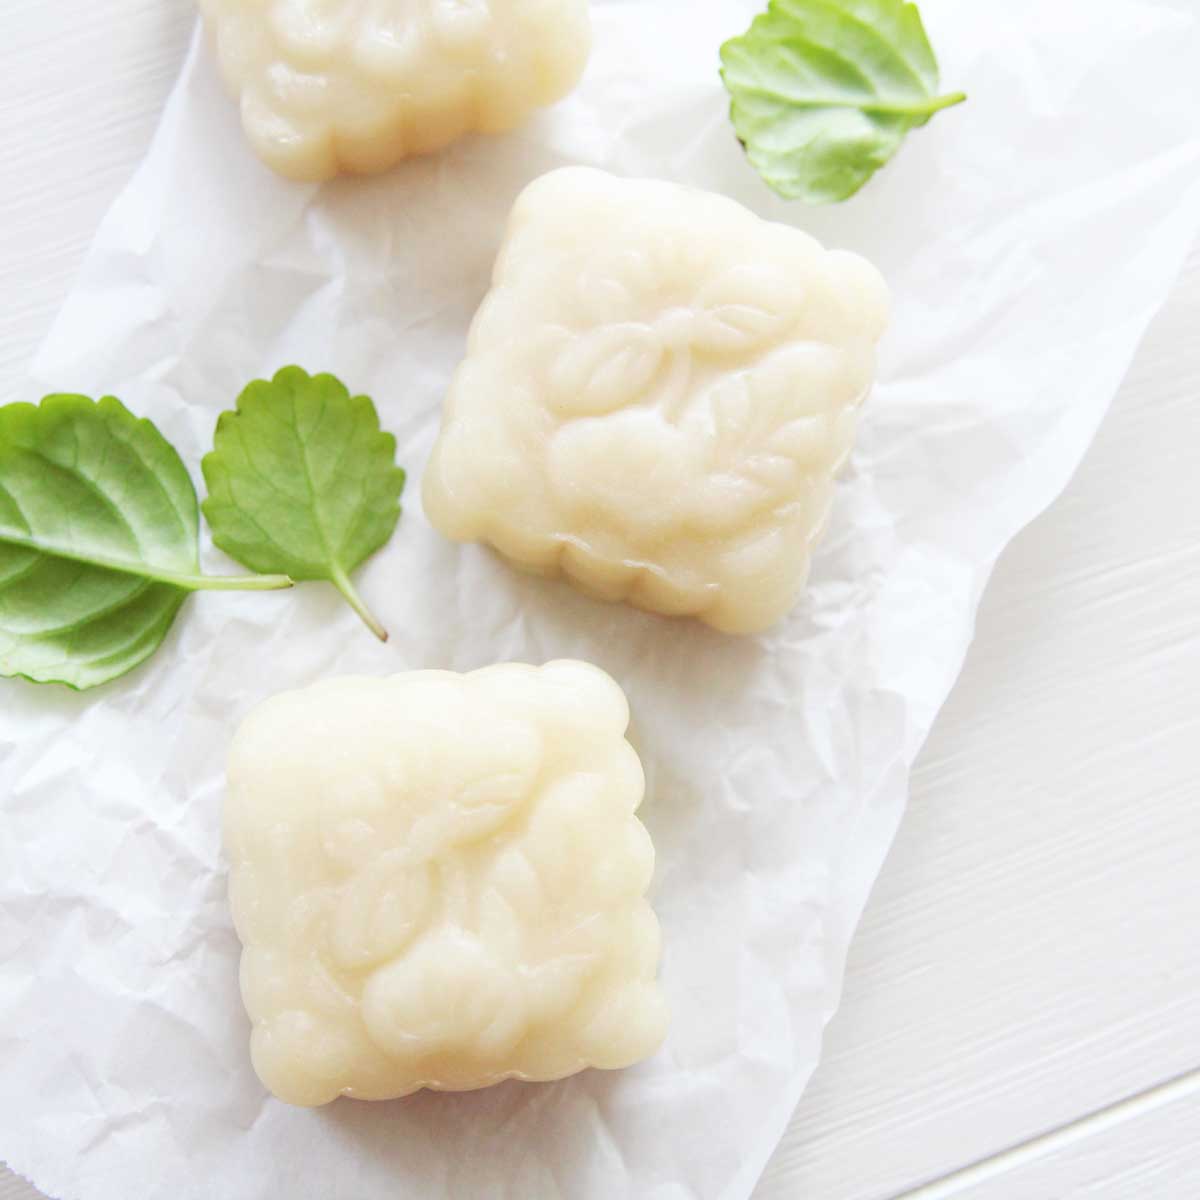 shortcut snowskin mooncakes made in the microwave - no steaming required